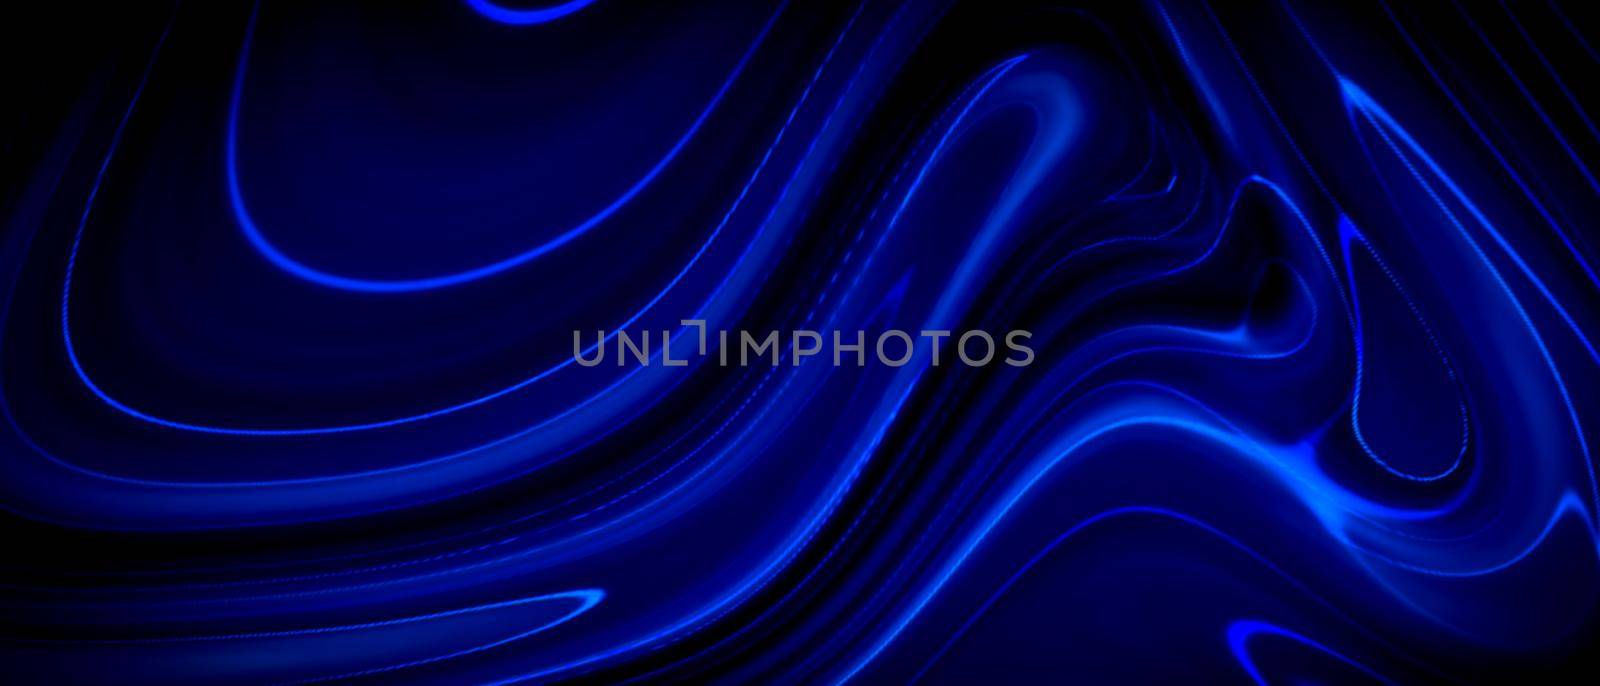 Liquid marbling paint texture background. Fluid painting abstract texture, Intensive color mix wallpaper. by Benzoix